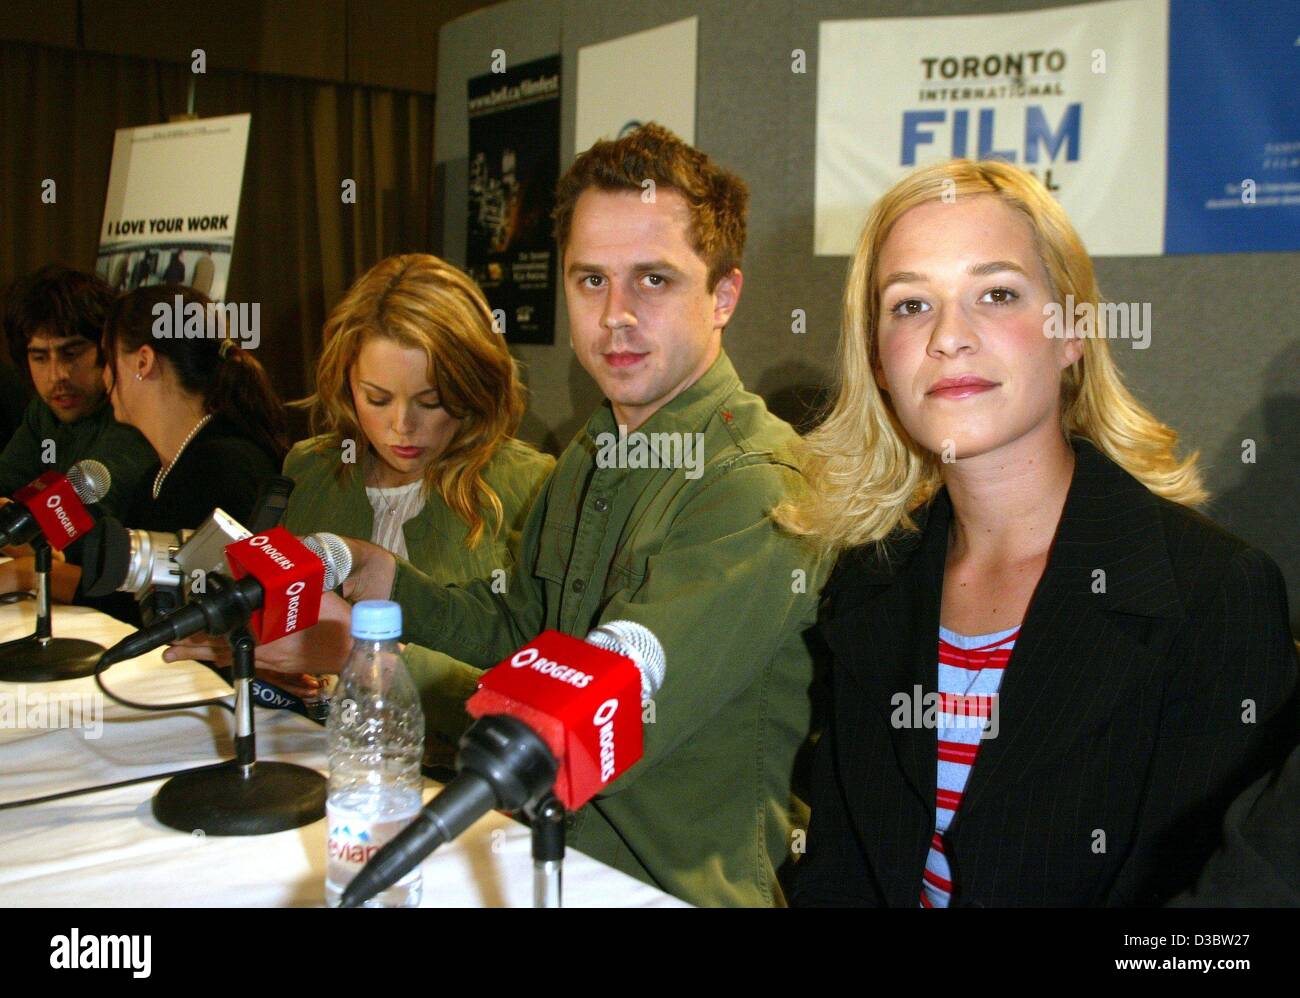 (dpa) - From L: US director Adam Goldberg and the actors Christina Ricci, Marisa Coughlan, Giovanni Ribisi and Franka Potente present their latest film 'I Love Your Work' during a press conference at the Toronto Filmfestival in Toronto, Canada, 6 September 2003. Stock Photo